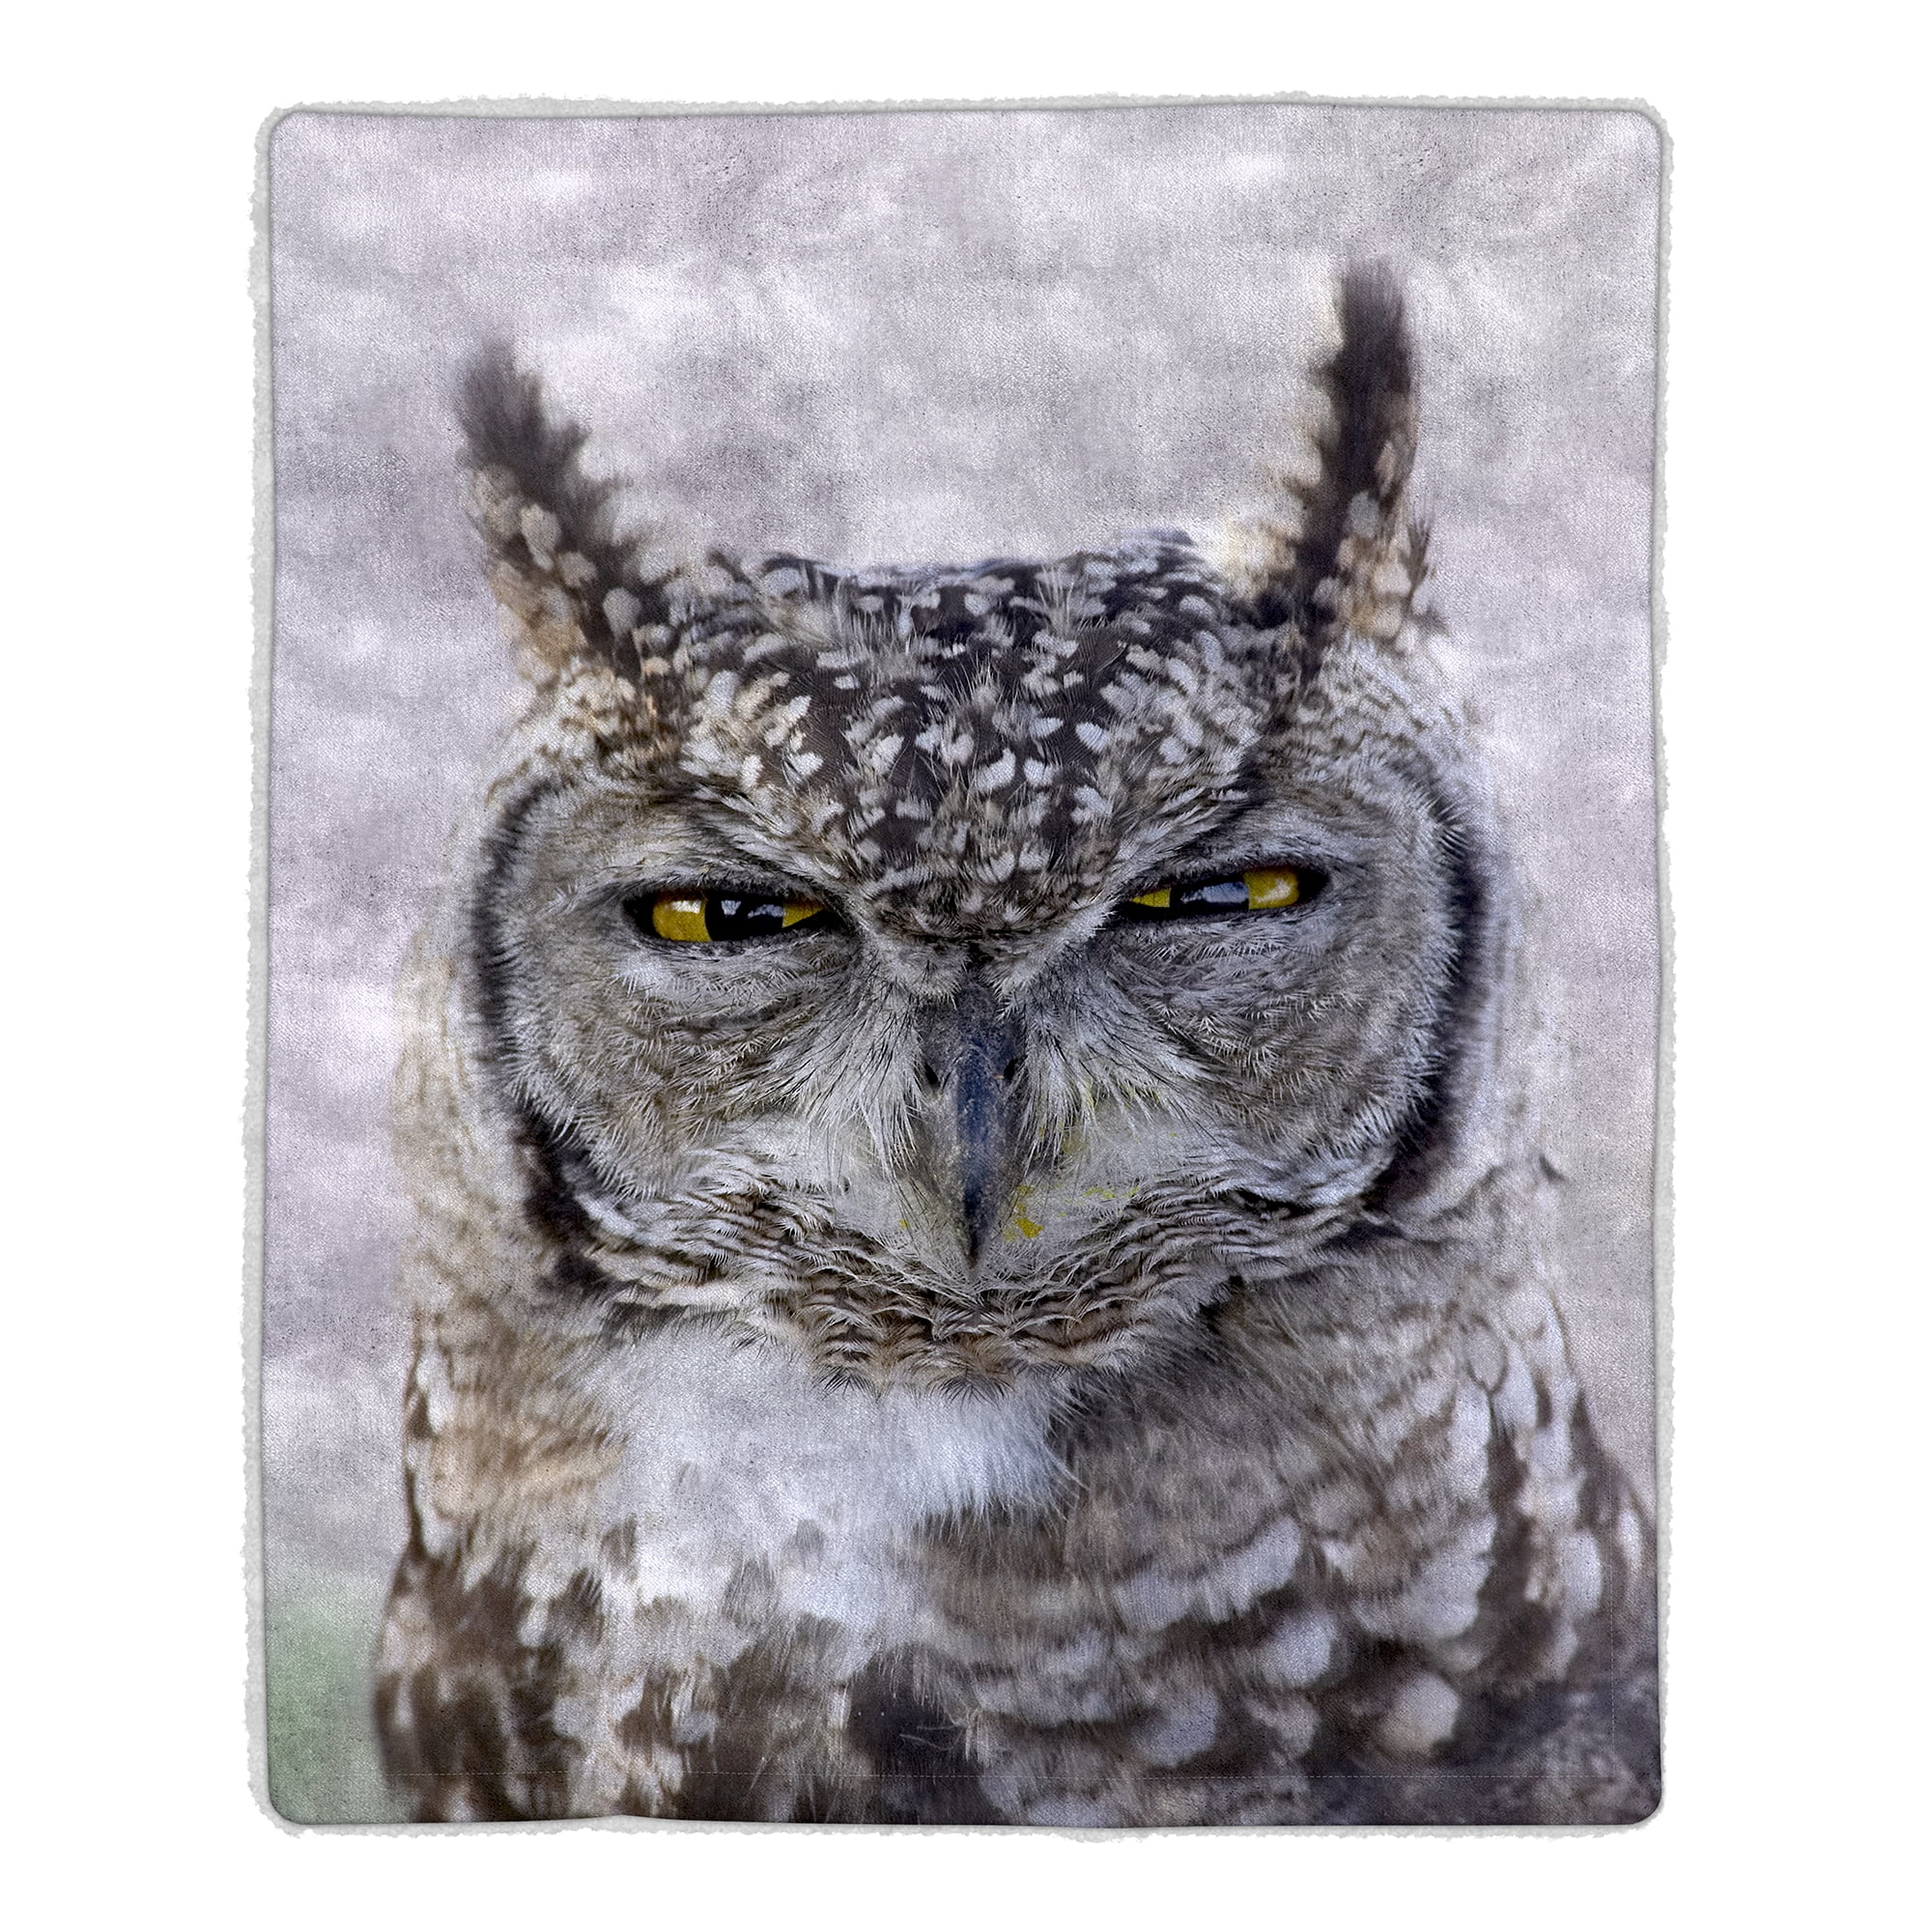 ALAZA Ethnic Owl Blanket Lightweight Soft Warm Throw Blanket Fit Sofa Couch Office Home Decor Suitable for All Season Size 60x90 Inches 